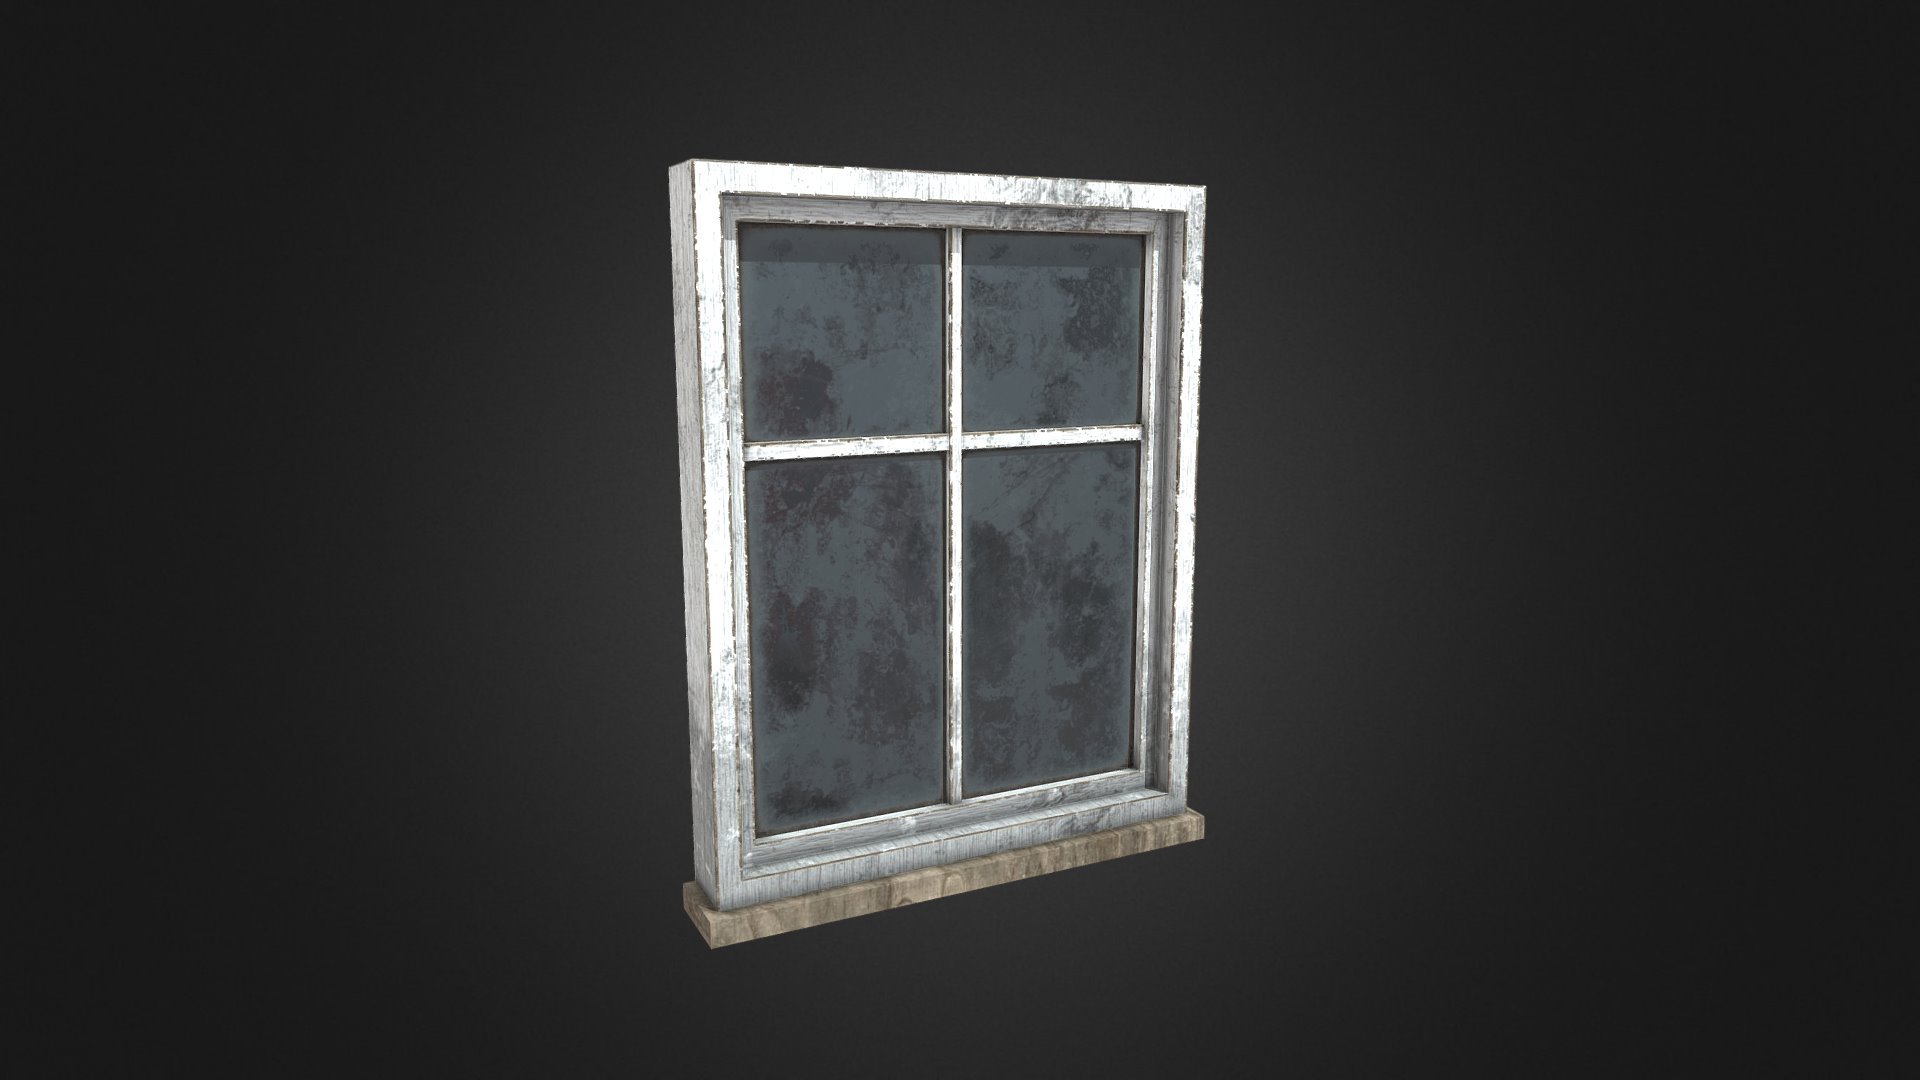 Once more, a windows in really bad shape, makes its way to Sketchfab. This time in a new design, yet not broken 3d model